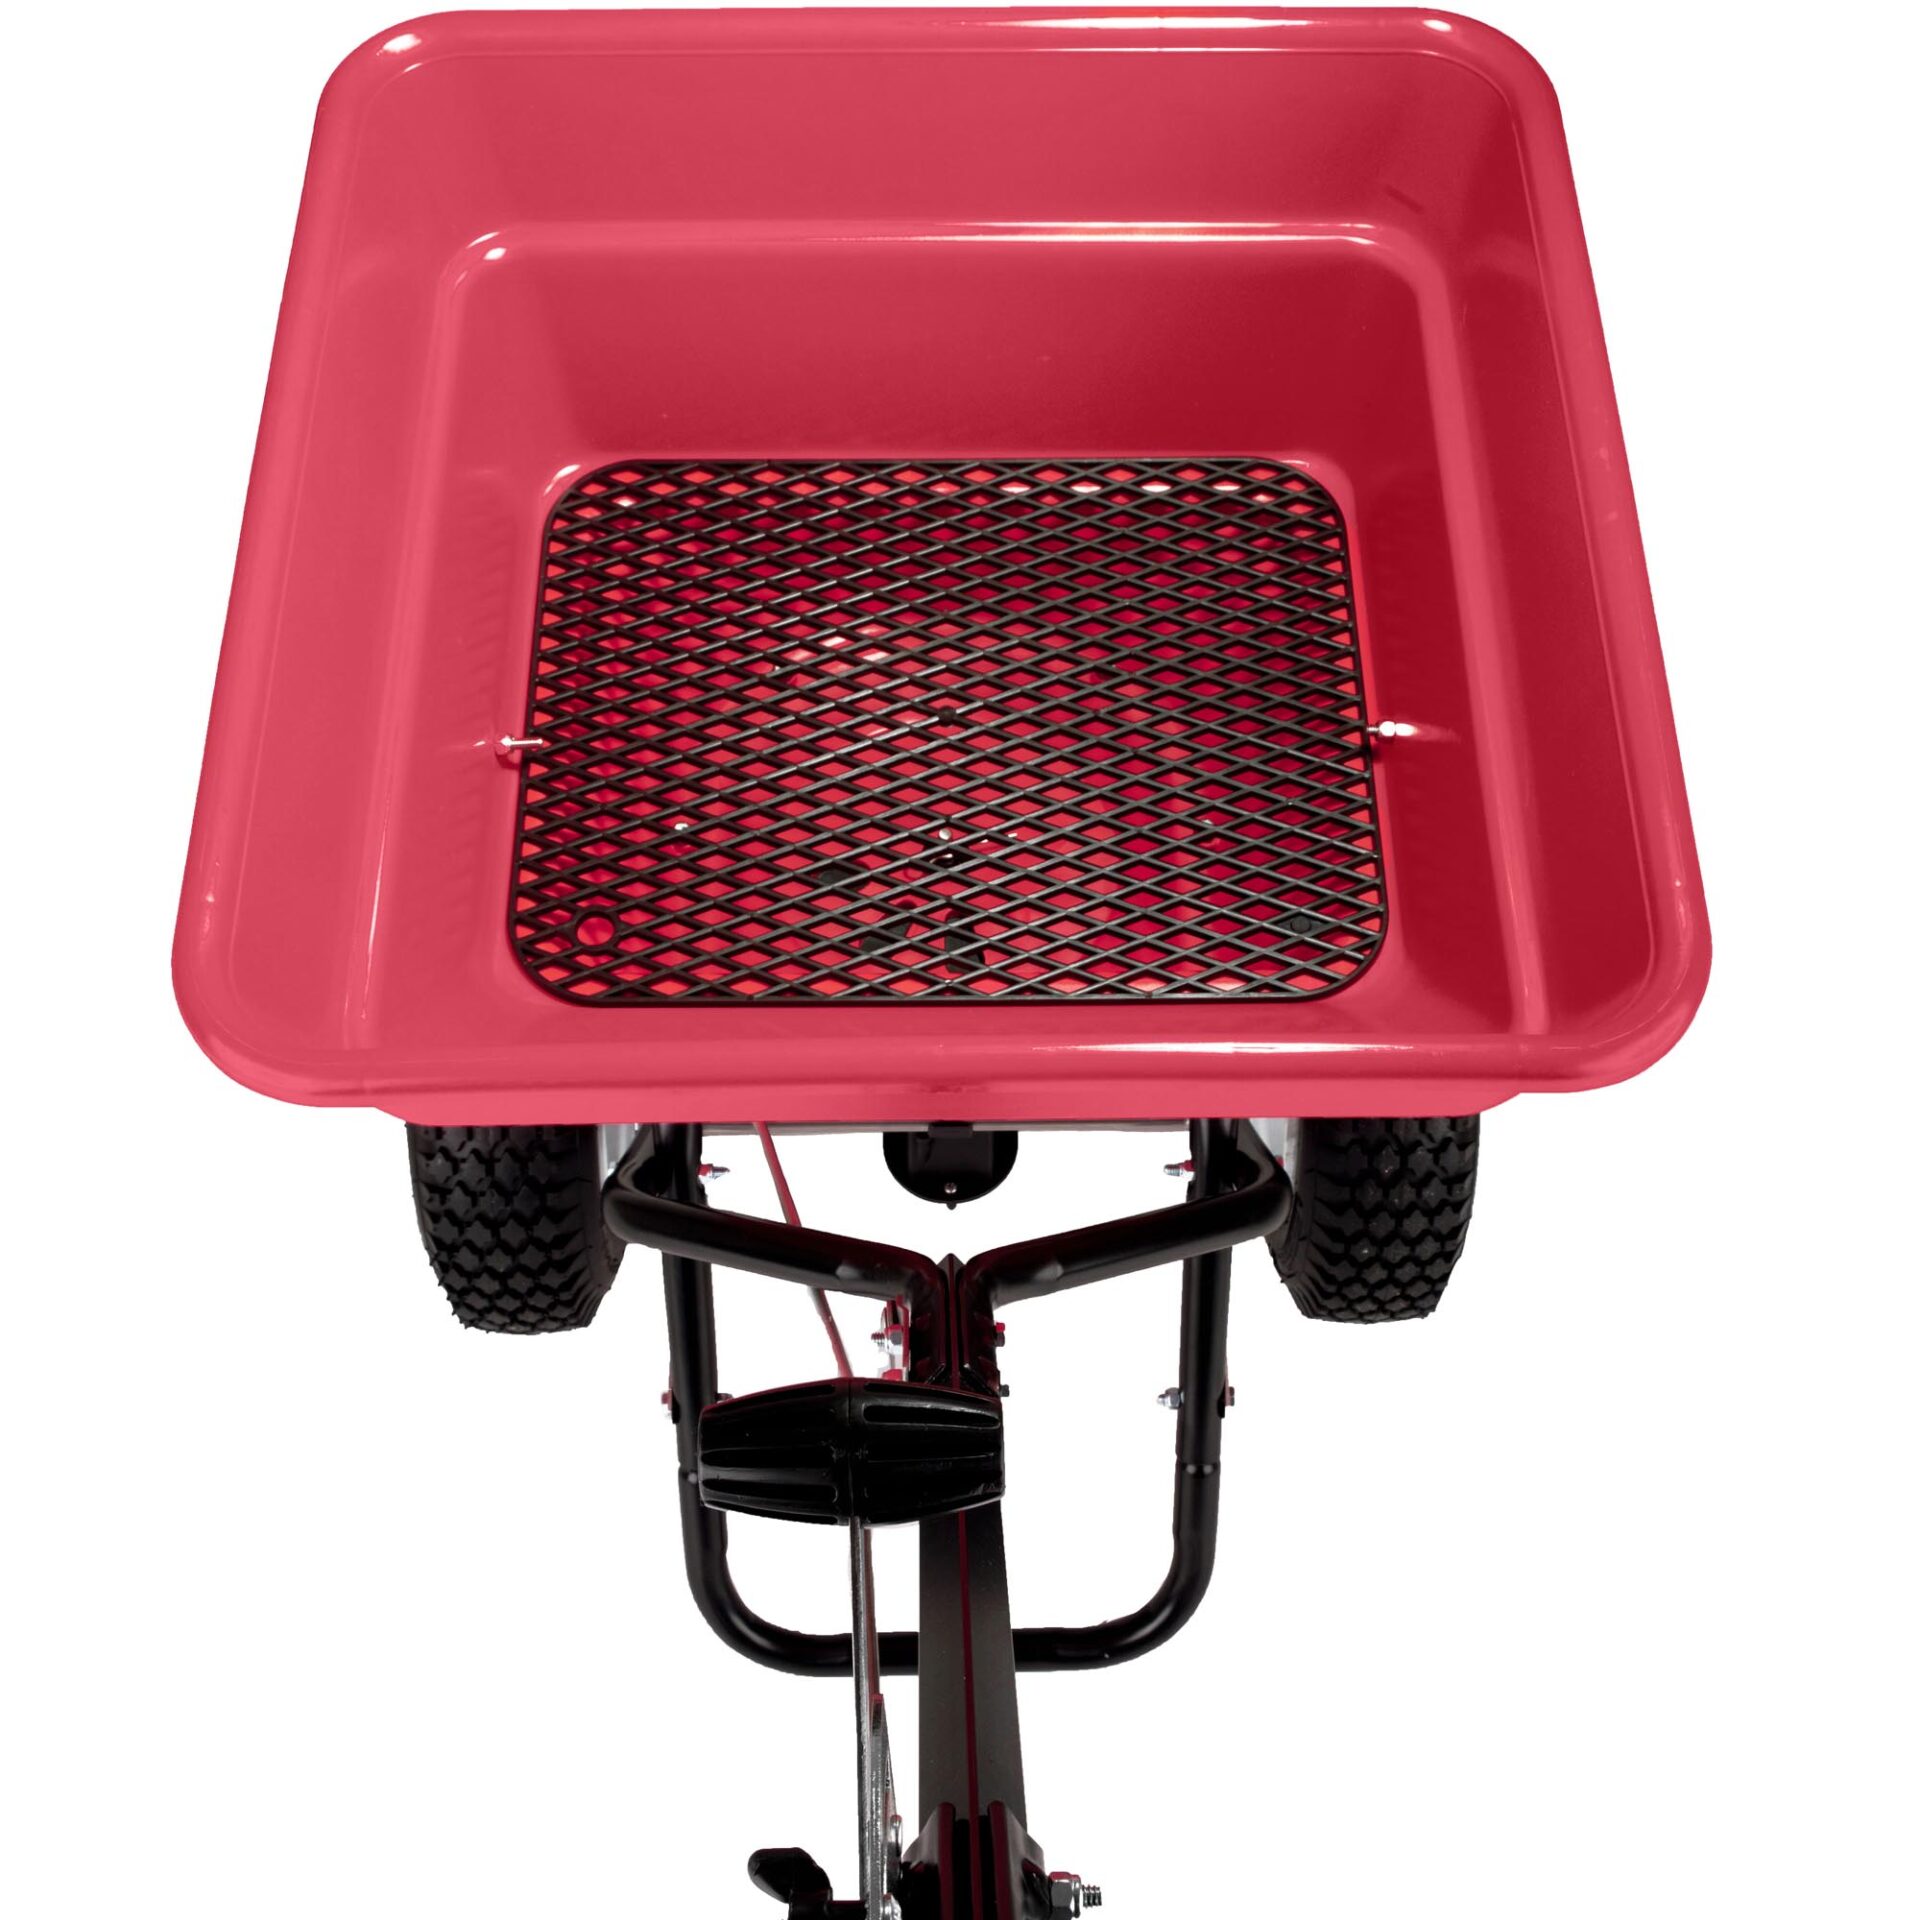 100lb Commercial Broadcast Spreader - EarthWay Products Incorporated